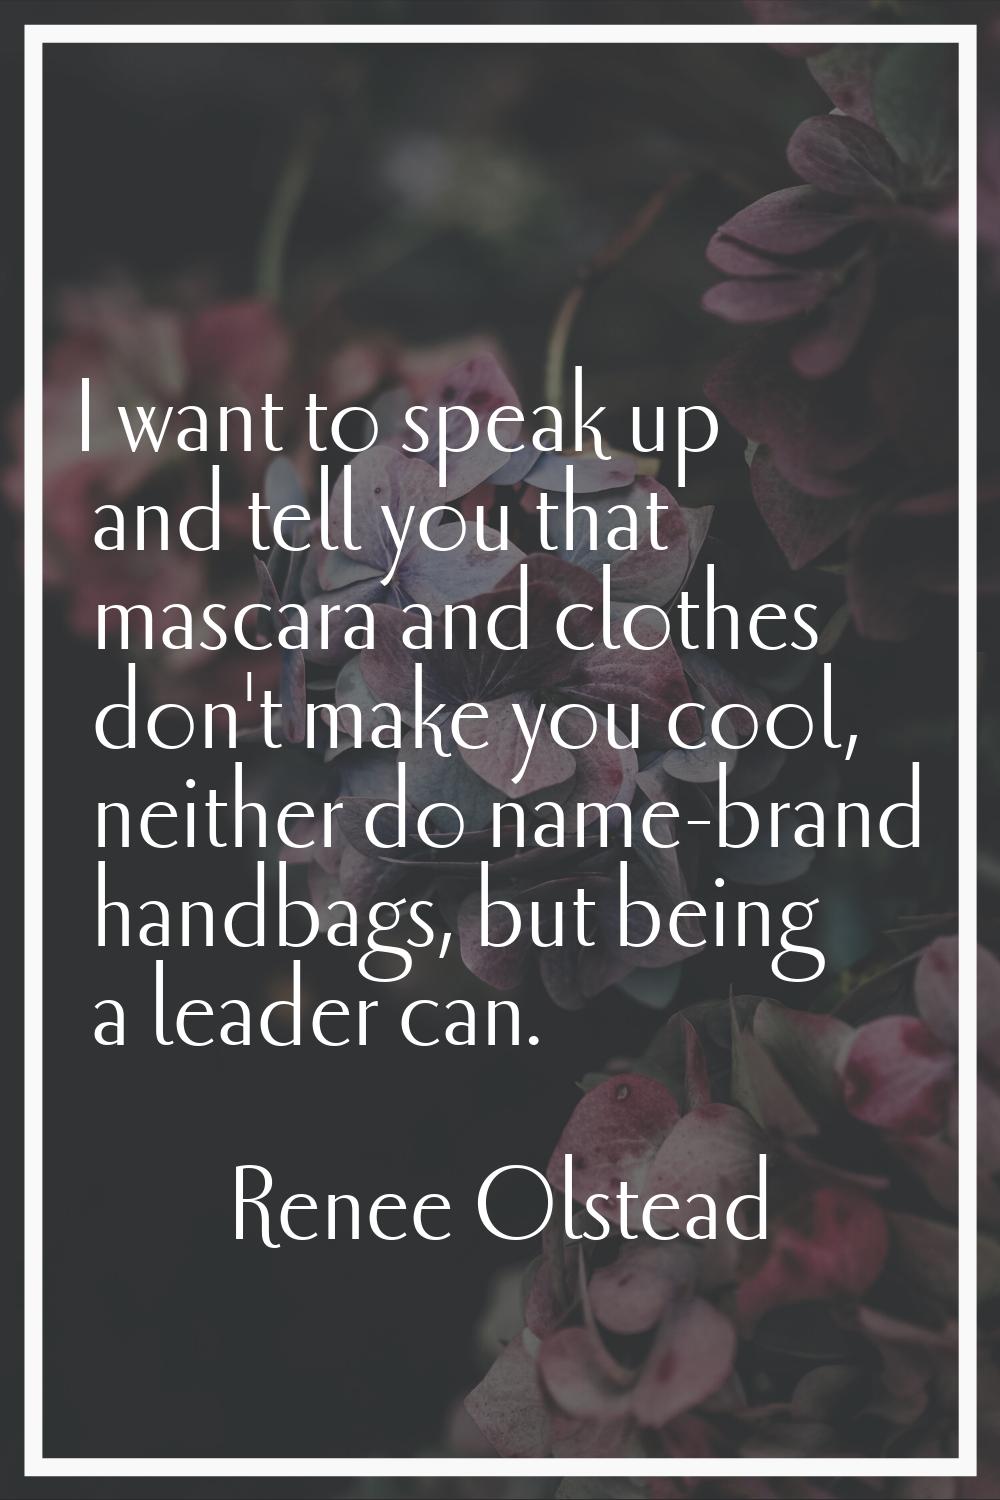 I want to speak up and tell you that mascara and clothes don't make you cool, neither do name-brand